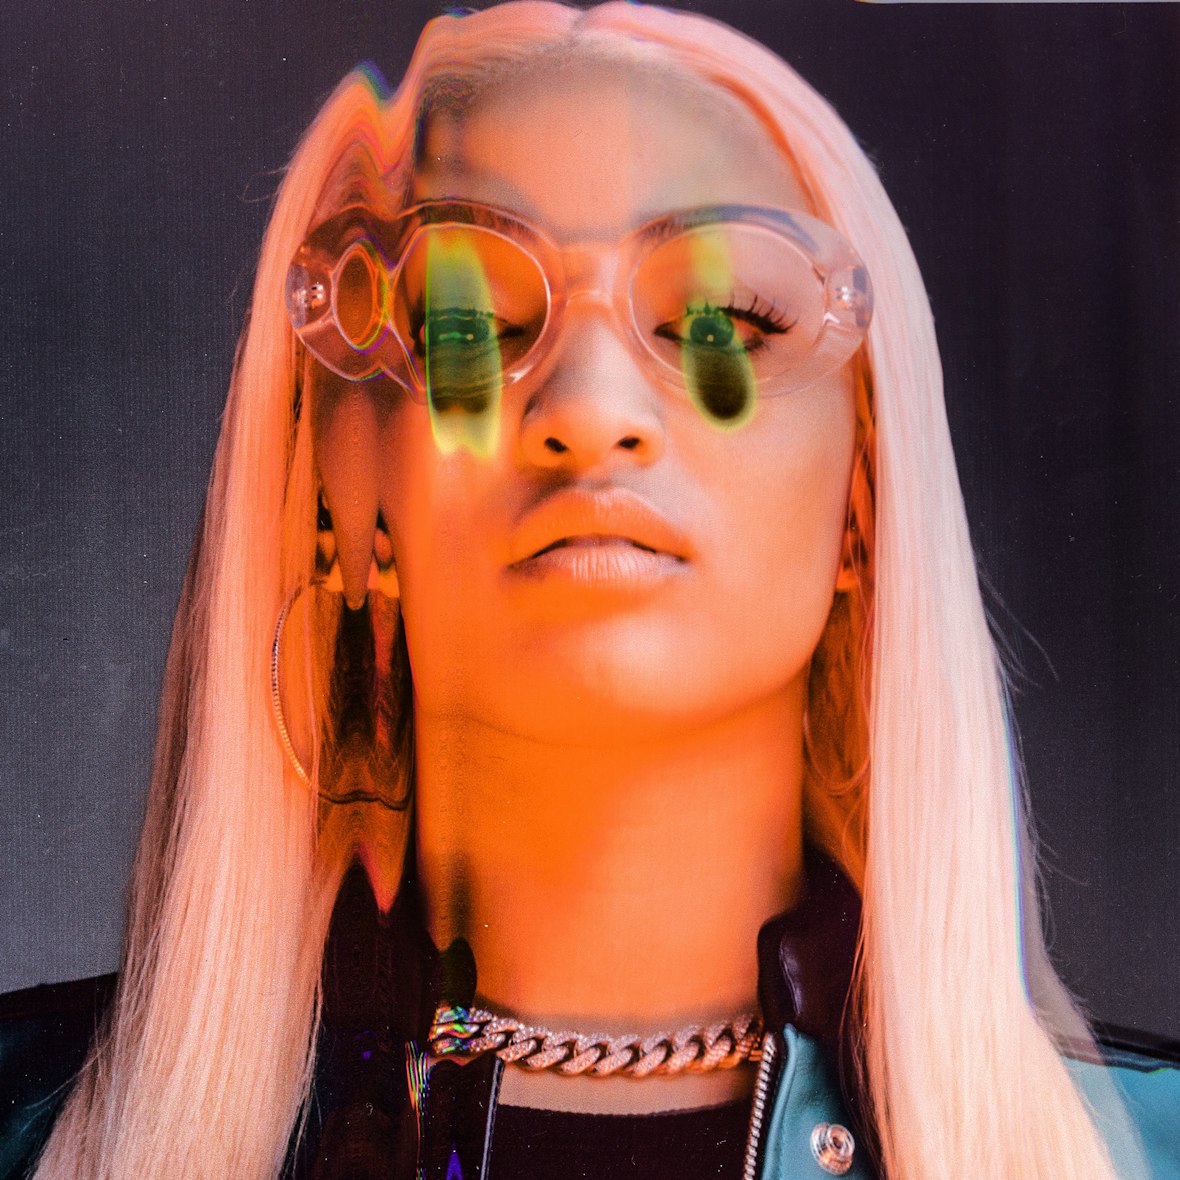 Way too blessed: An afternoon with dancehall star Shenseea - The Face